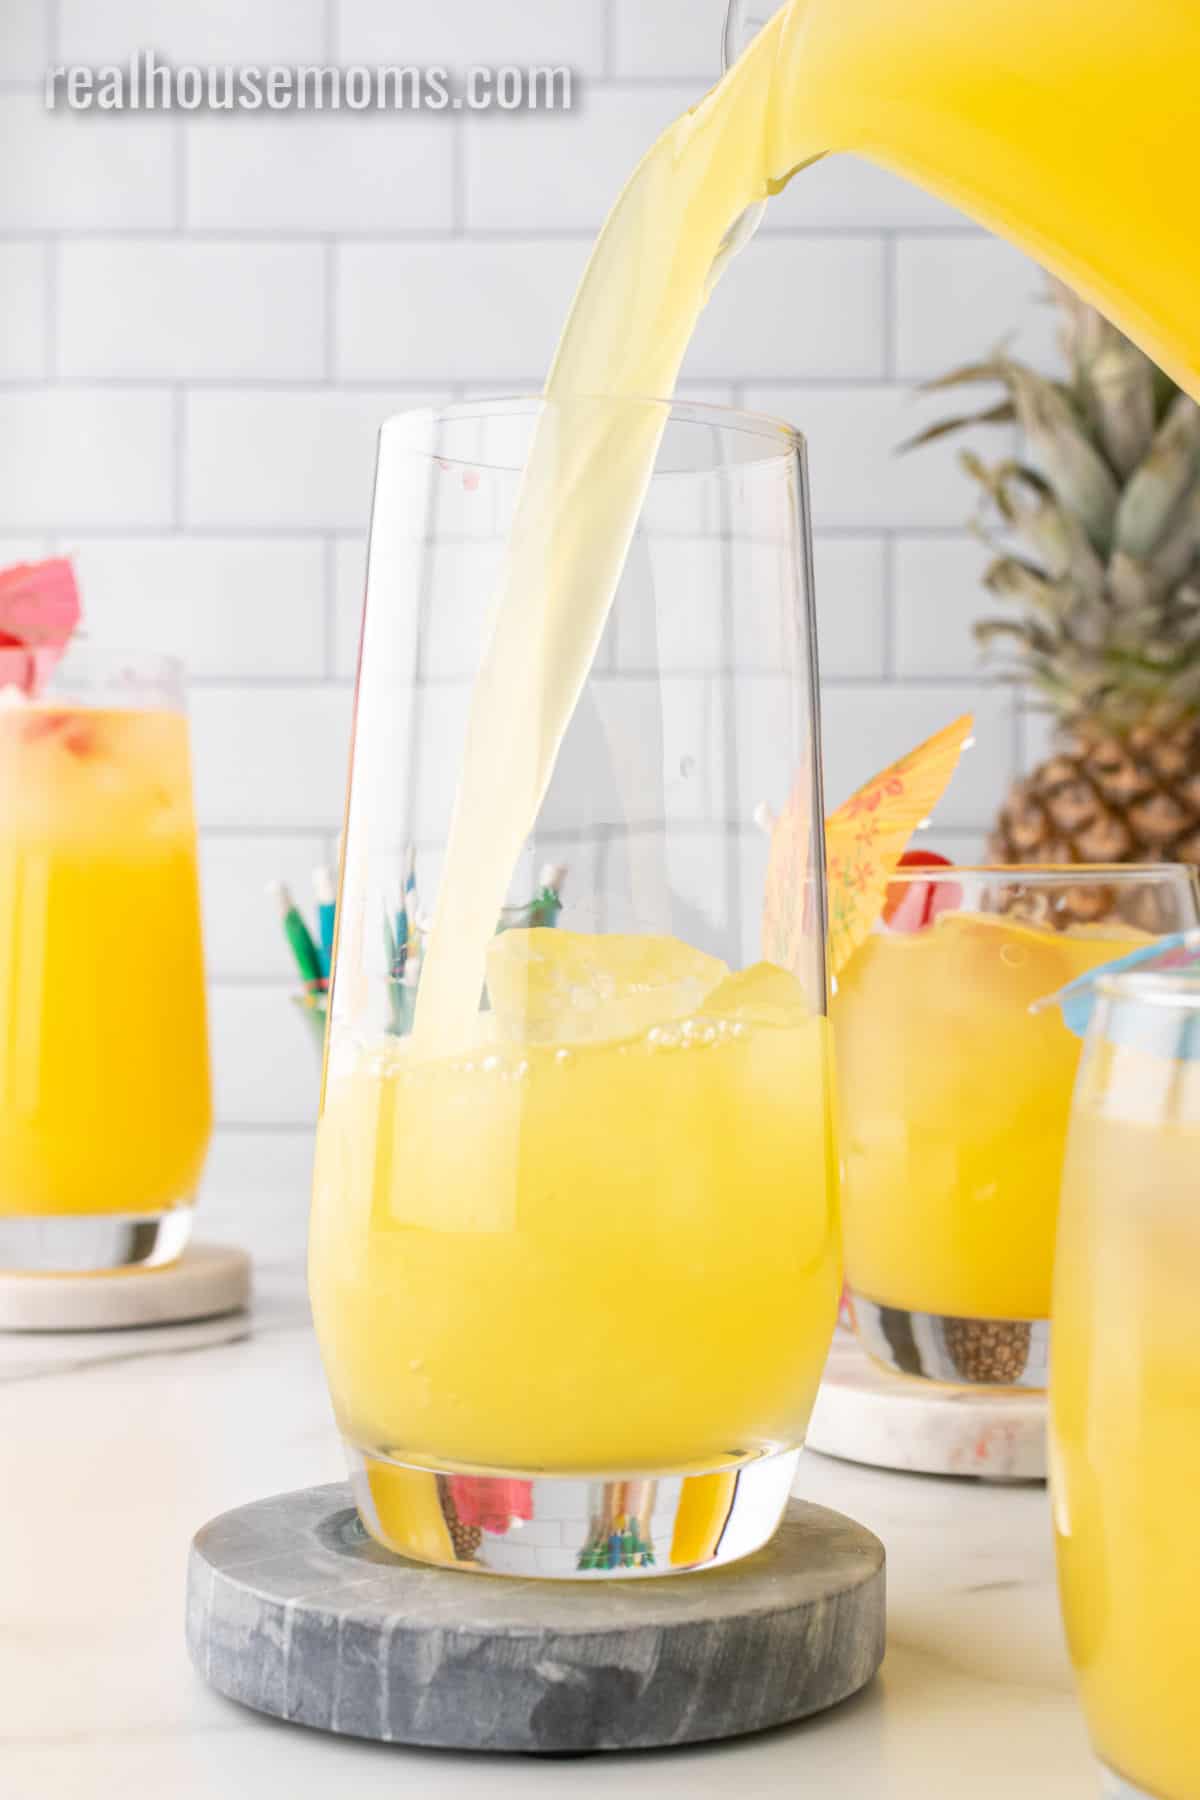 Moscato Punch ⋆ Real Housemoms